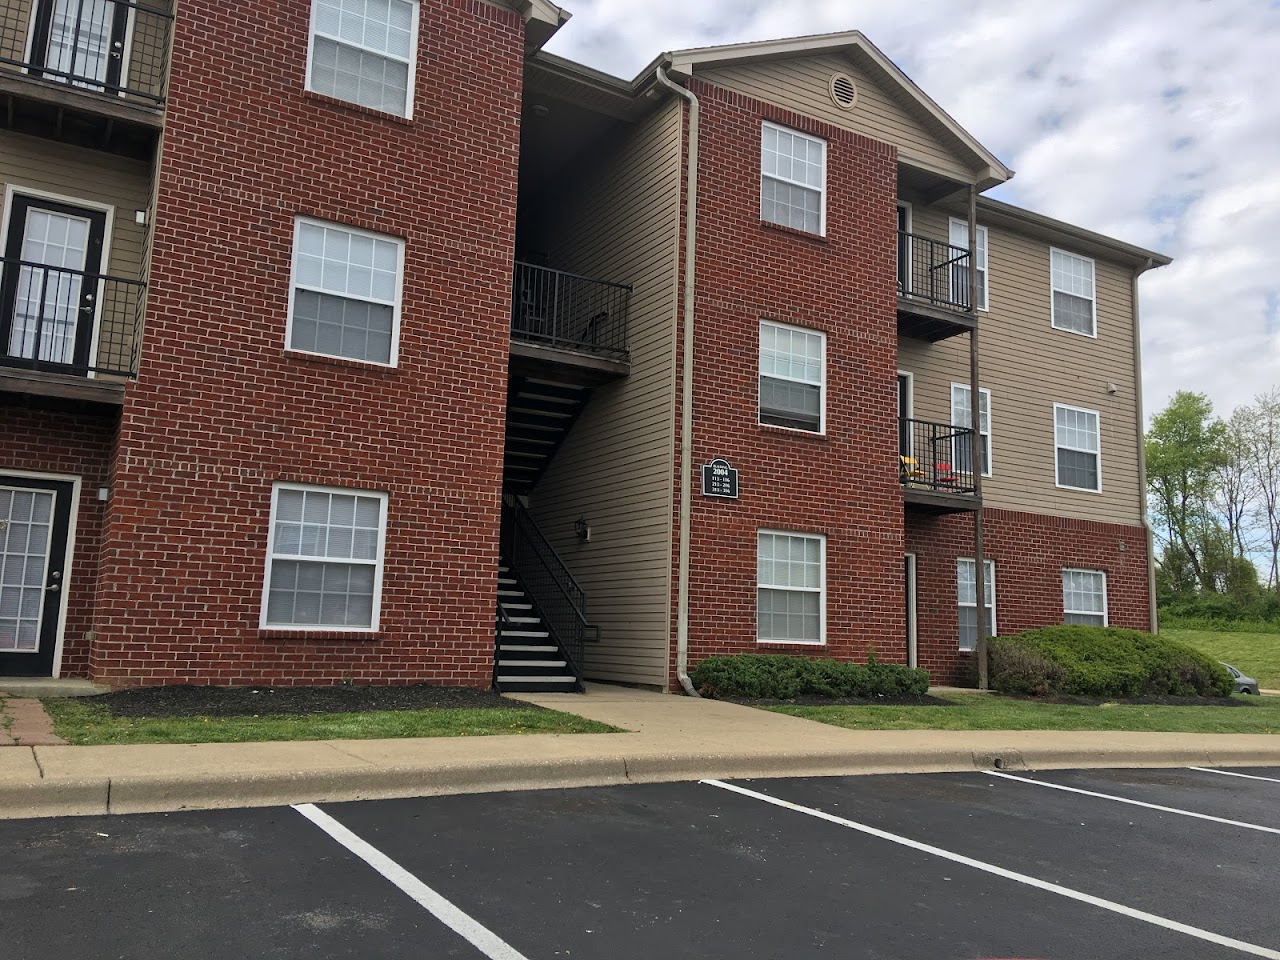 Photo of HALLMARK JEFFERSONVILLE. Affordable housing located at 2000 PADDLE WHEEL CT JEFFERSONVILLE, IN 47130